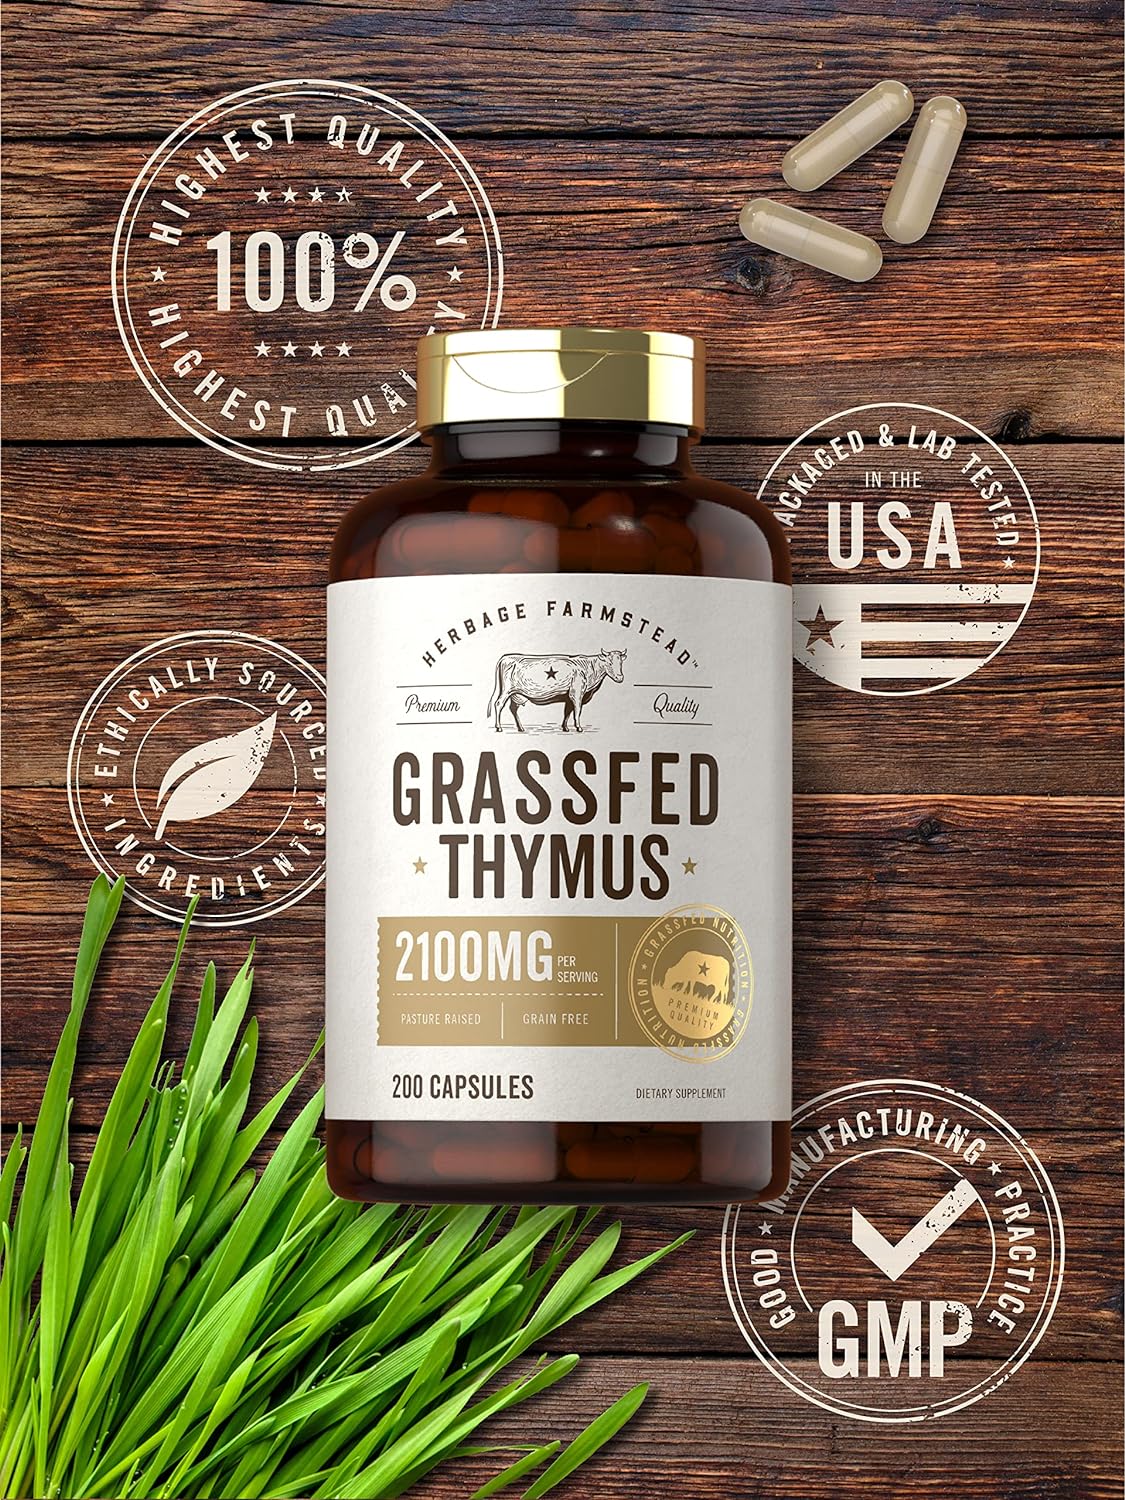 Carlyle Grass Fed Beef Thymus Supplement | 4200mg | 200 Capsules | Pasture Raised, Non-GMO, Gluten Free | by Herbage Farmstead : Health & Household